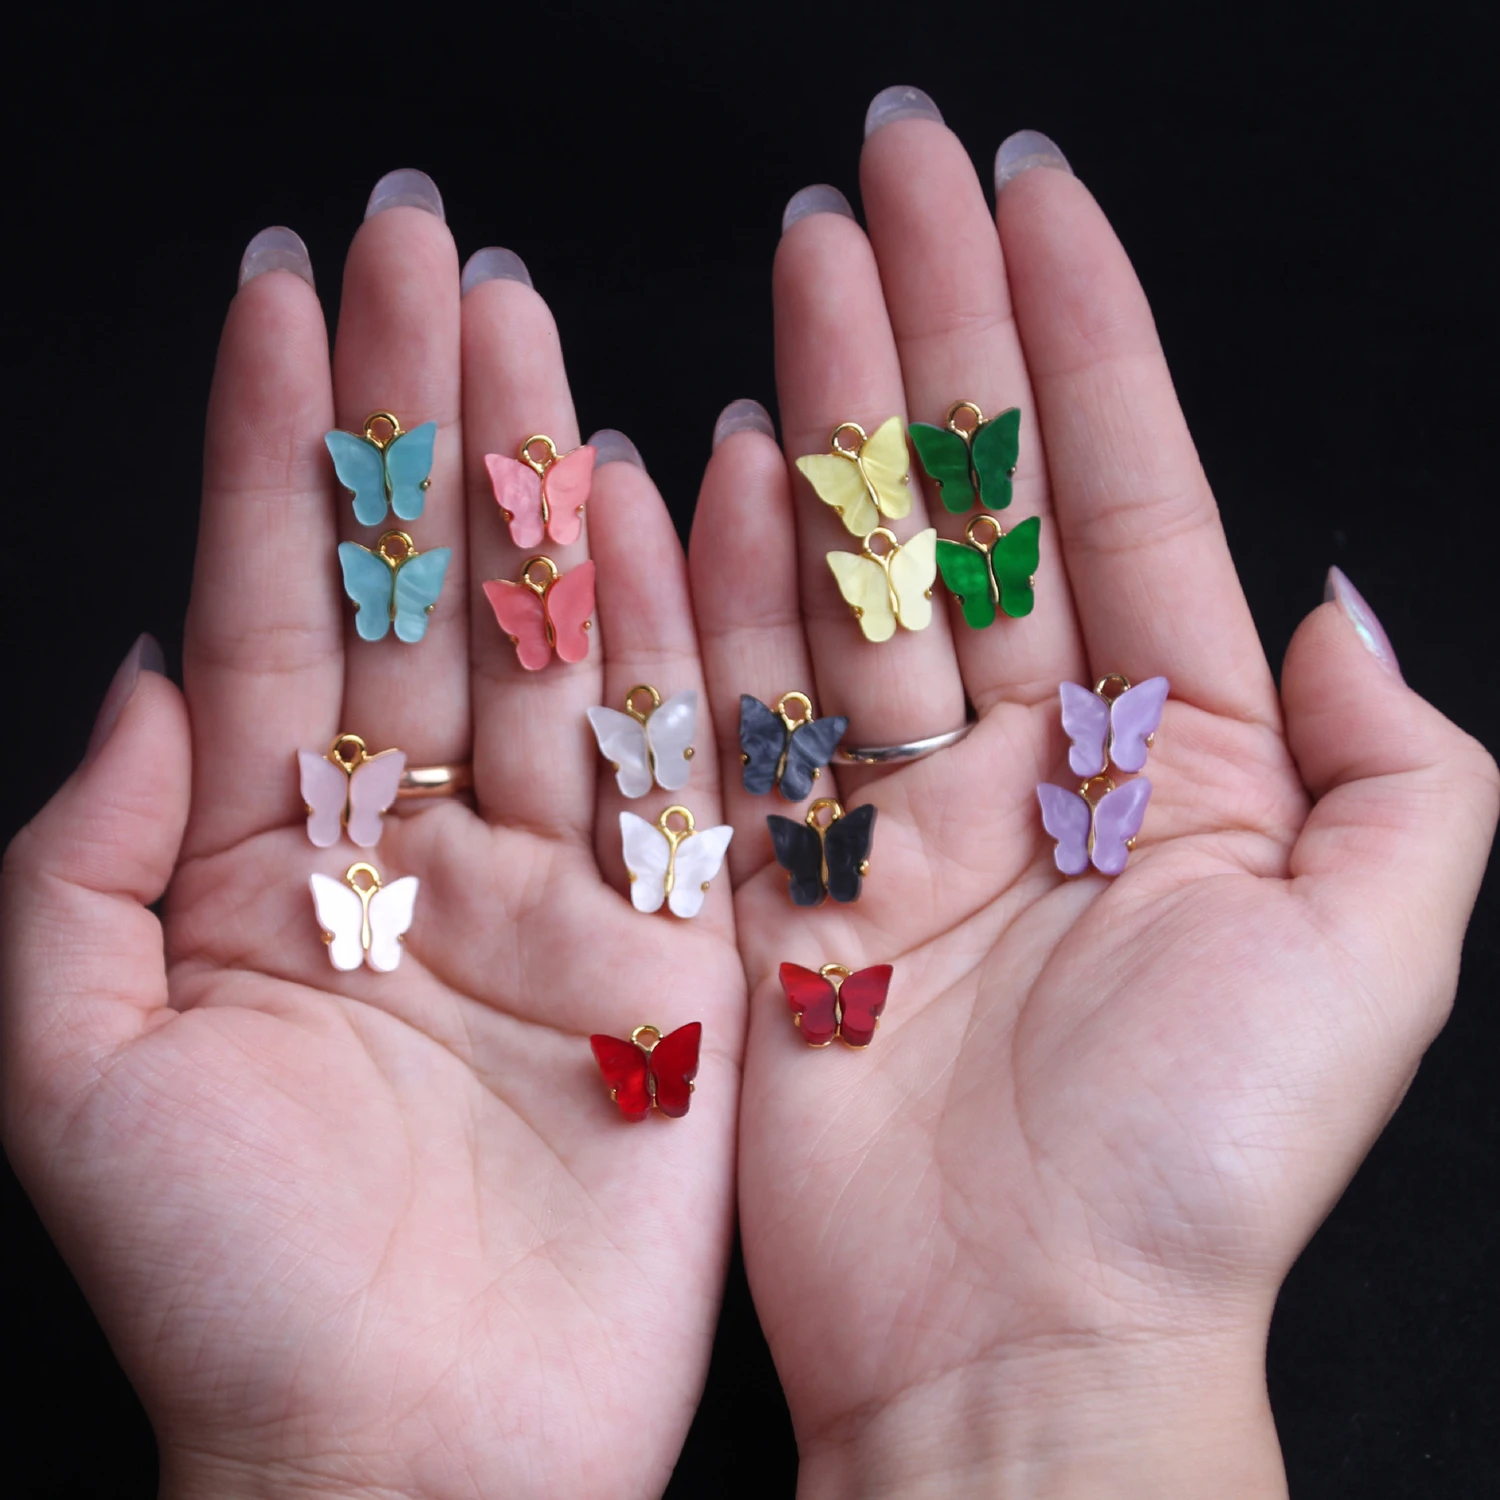 

Best Seller Wholesale Gold Plated Acrylic Butterfly Charm Pendant Necklace Earrings Jewelry Making Accessories, Red/green/black/purple/pink/white/light blue/yellow